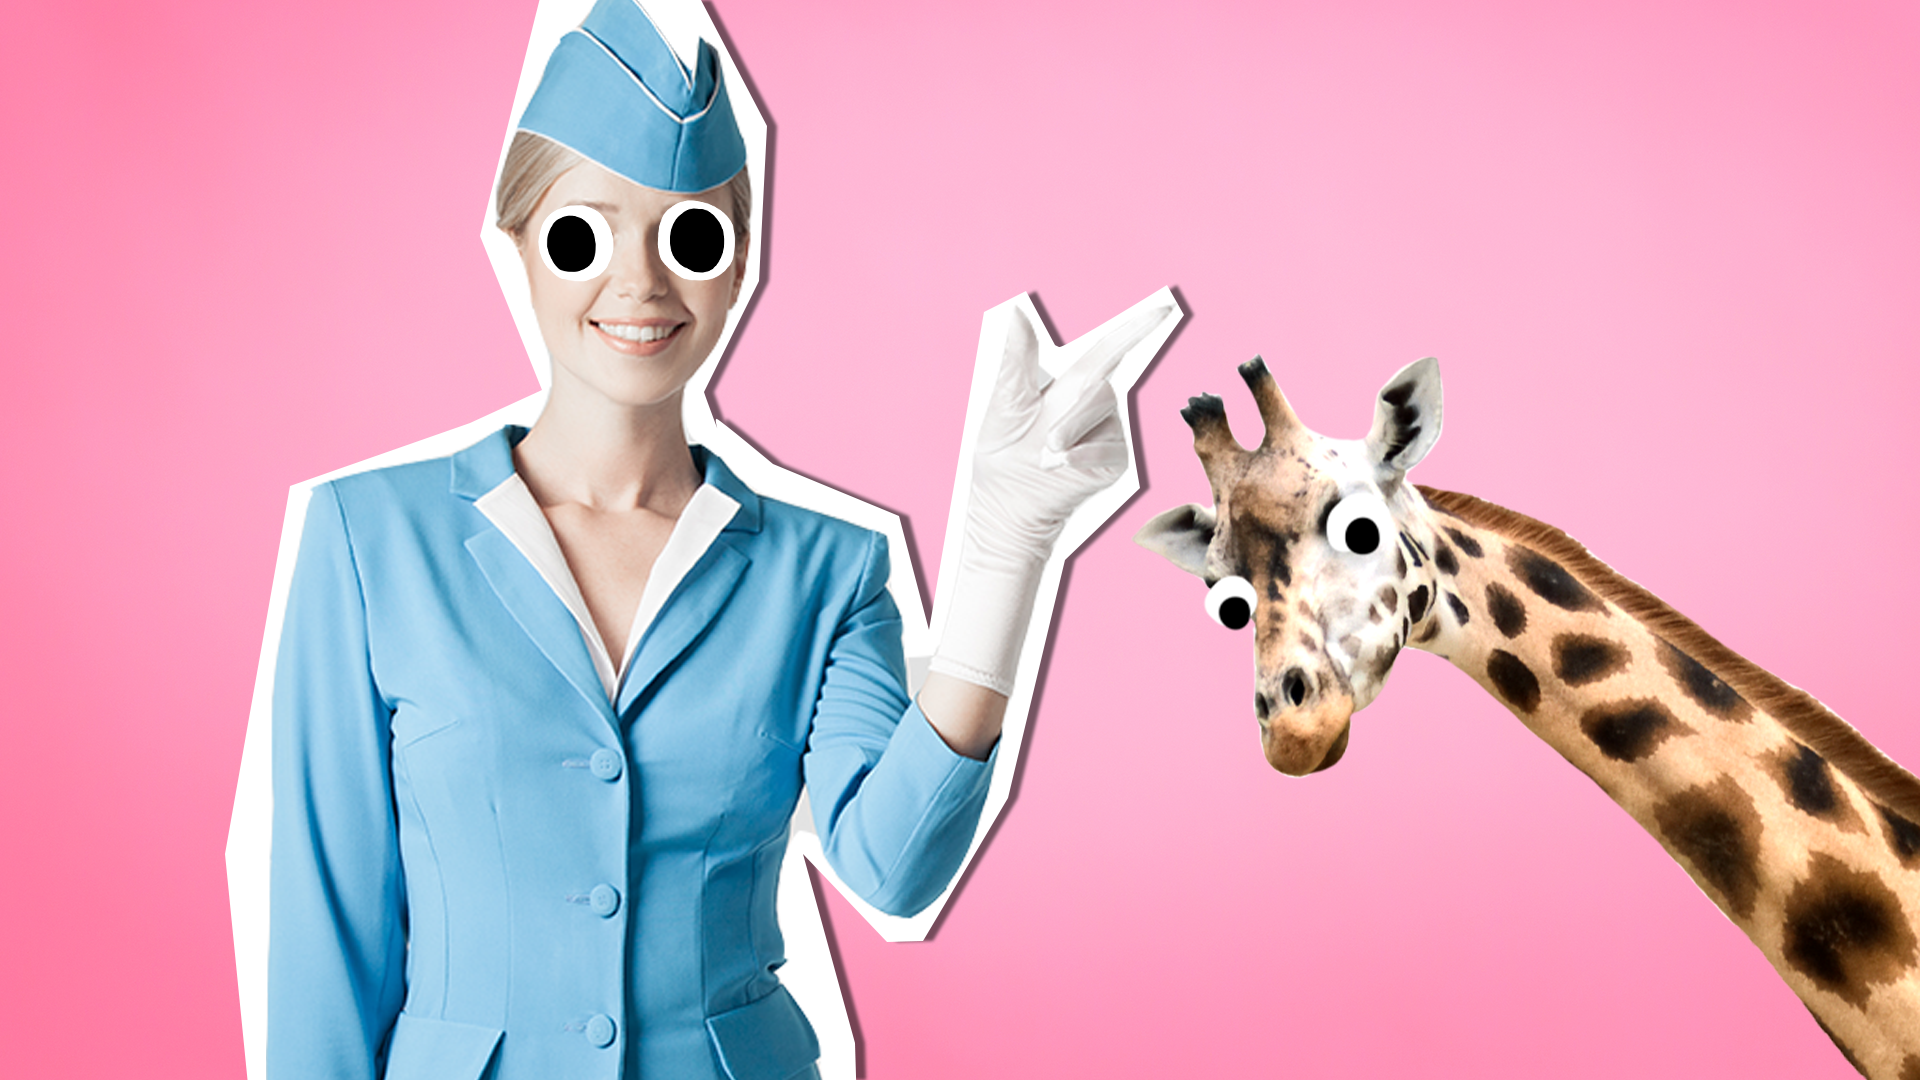 Air hostess Barbie looking woman on pink background with derpy giraffe